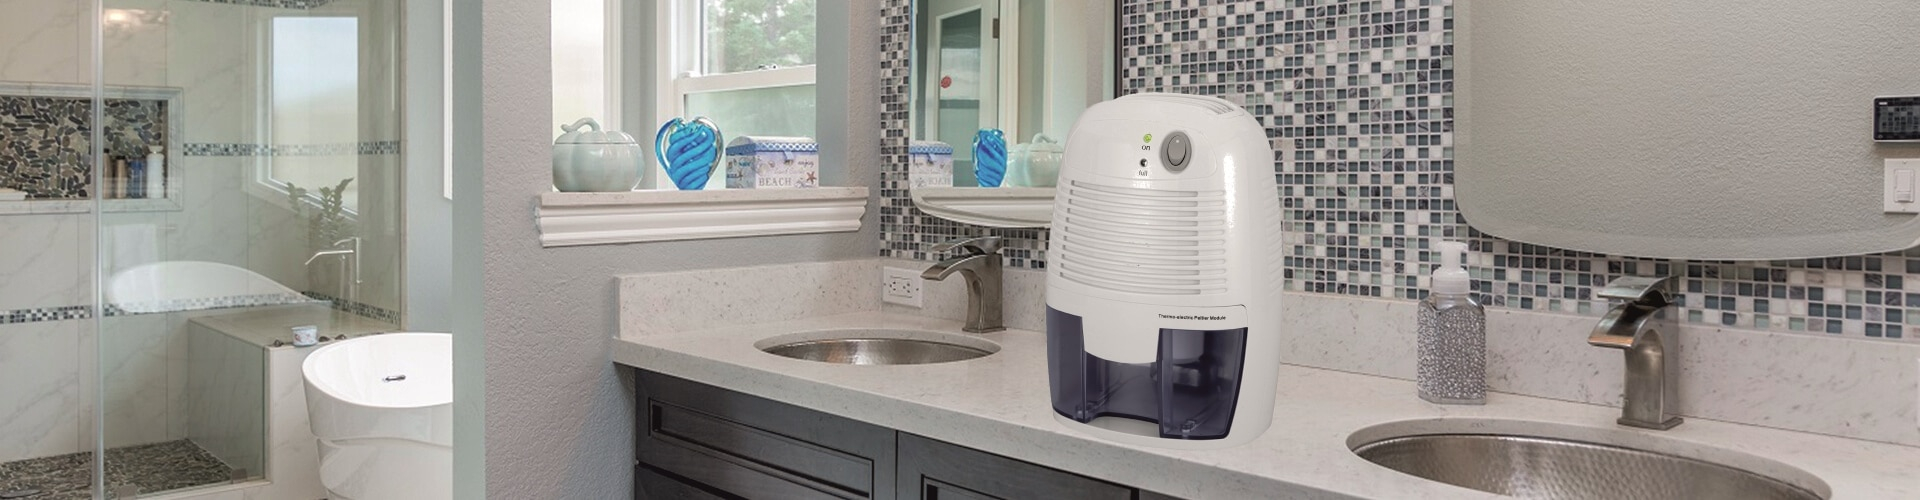 9 Best Dehumidifiers For Bathroom Apr 2020 Reviews in size 1920 X 500